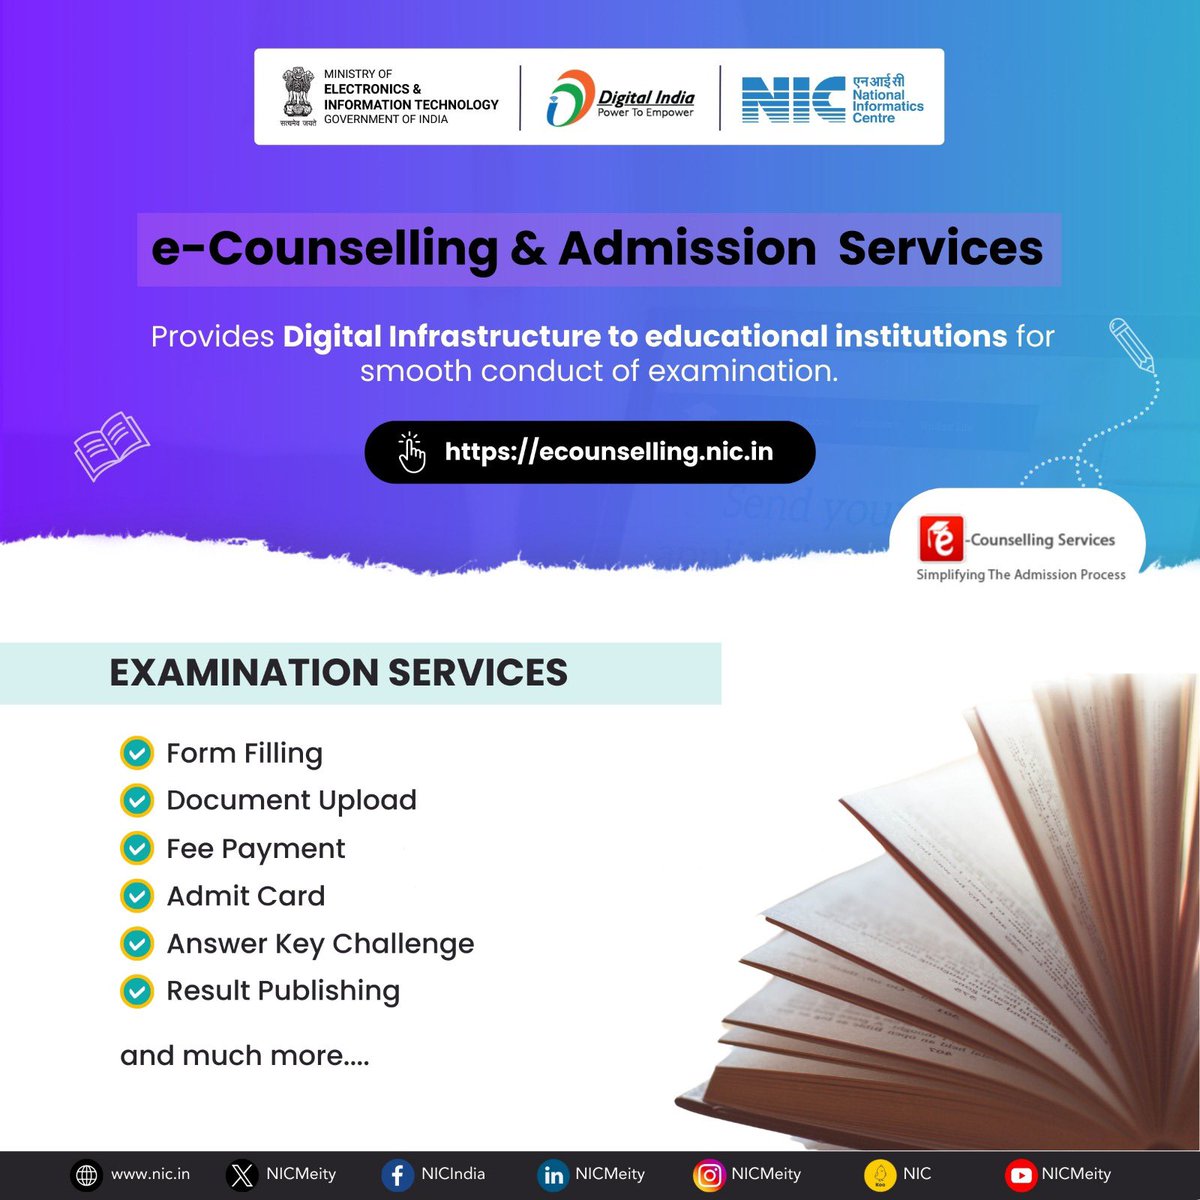 #eCounselling & #Admission Services by @NICMeity enhance exam processes through digital solutions, facilitating document uploading, fee payment, e-Admit cards issuance, and more. 
#NICMeitY #DigitalIndia #DigitalTransformation #EducationForAll